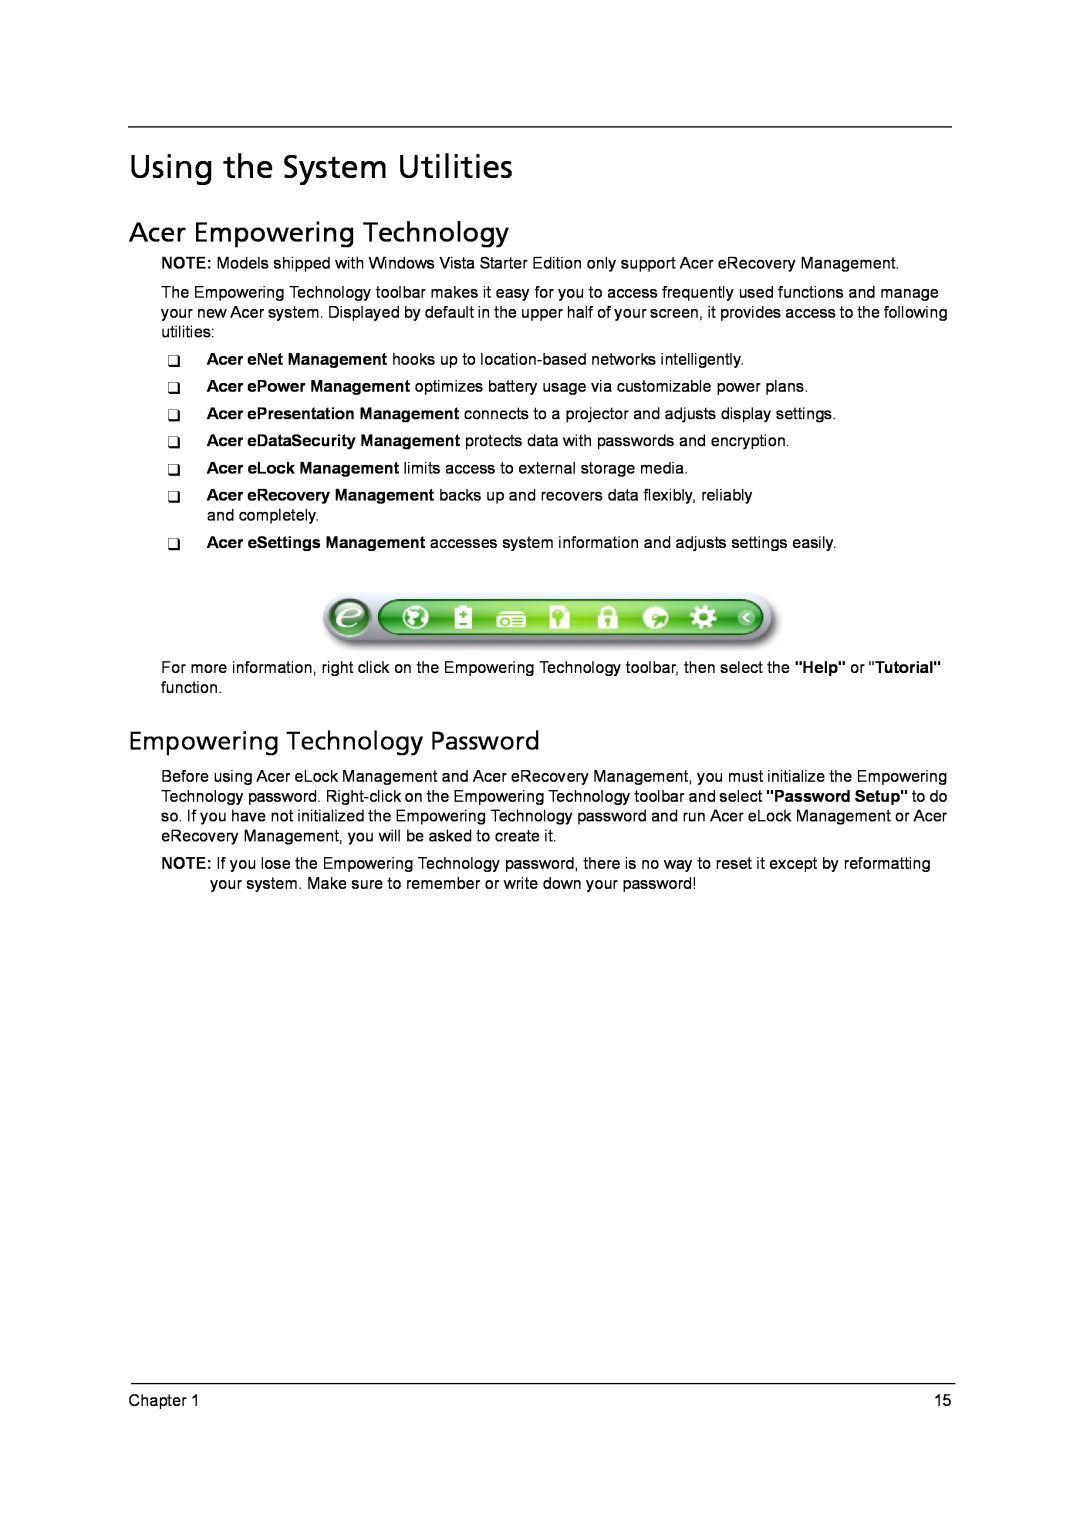 Acer 4315 manual Using the System Utilities, Acer Empowering Technology, Empowering Technology Password 